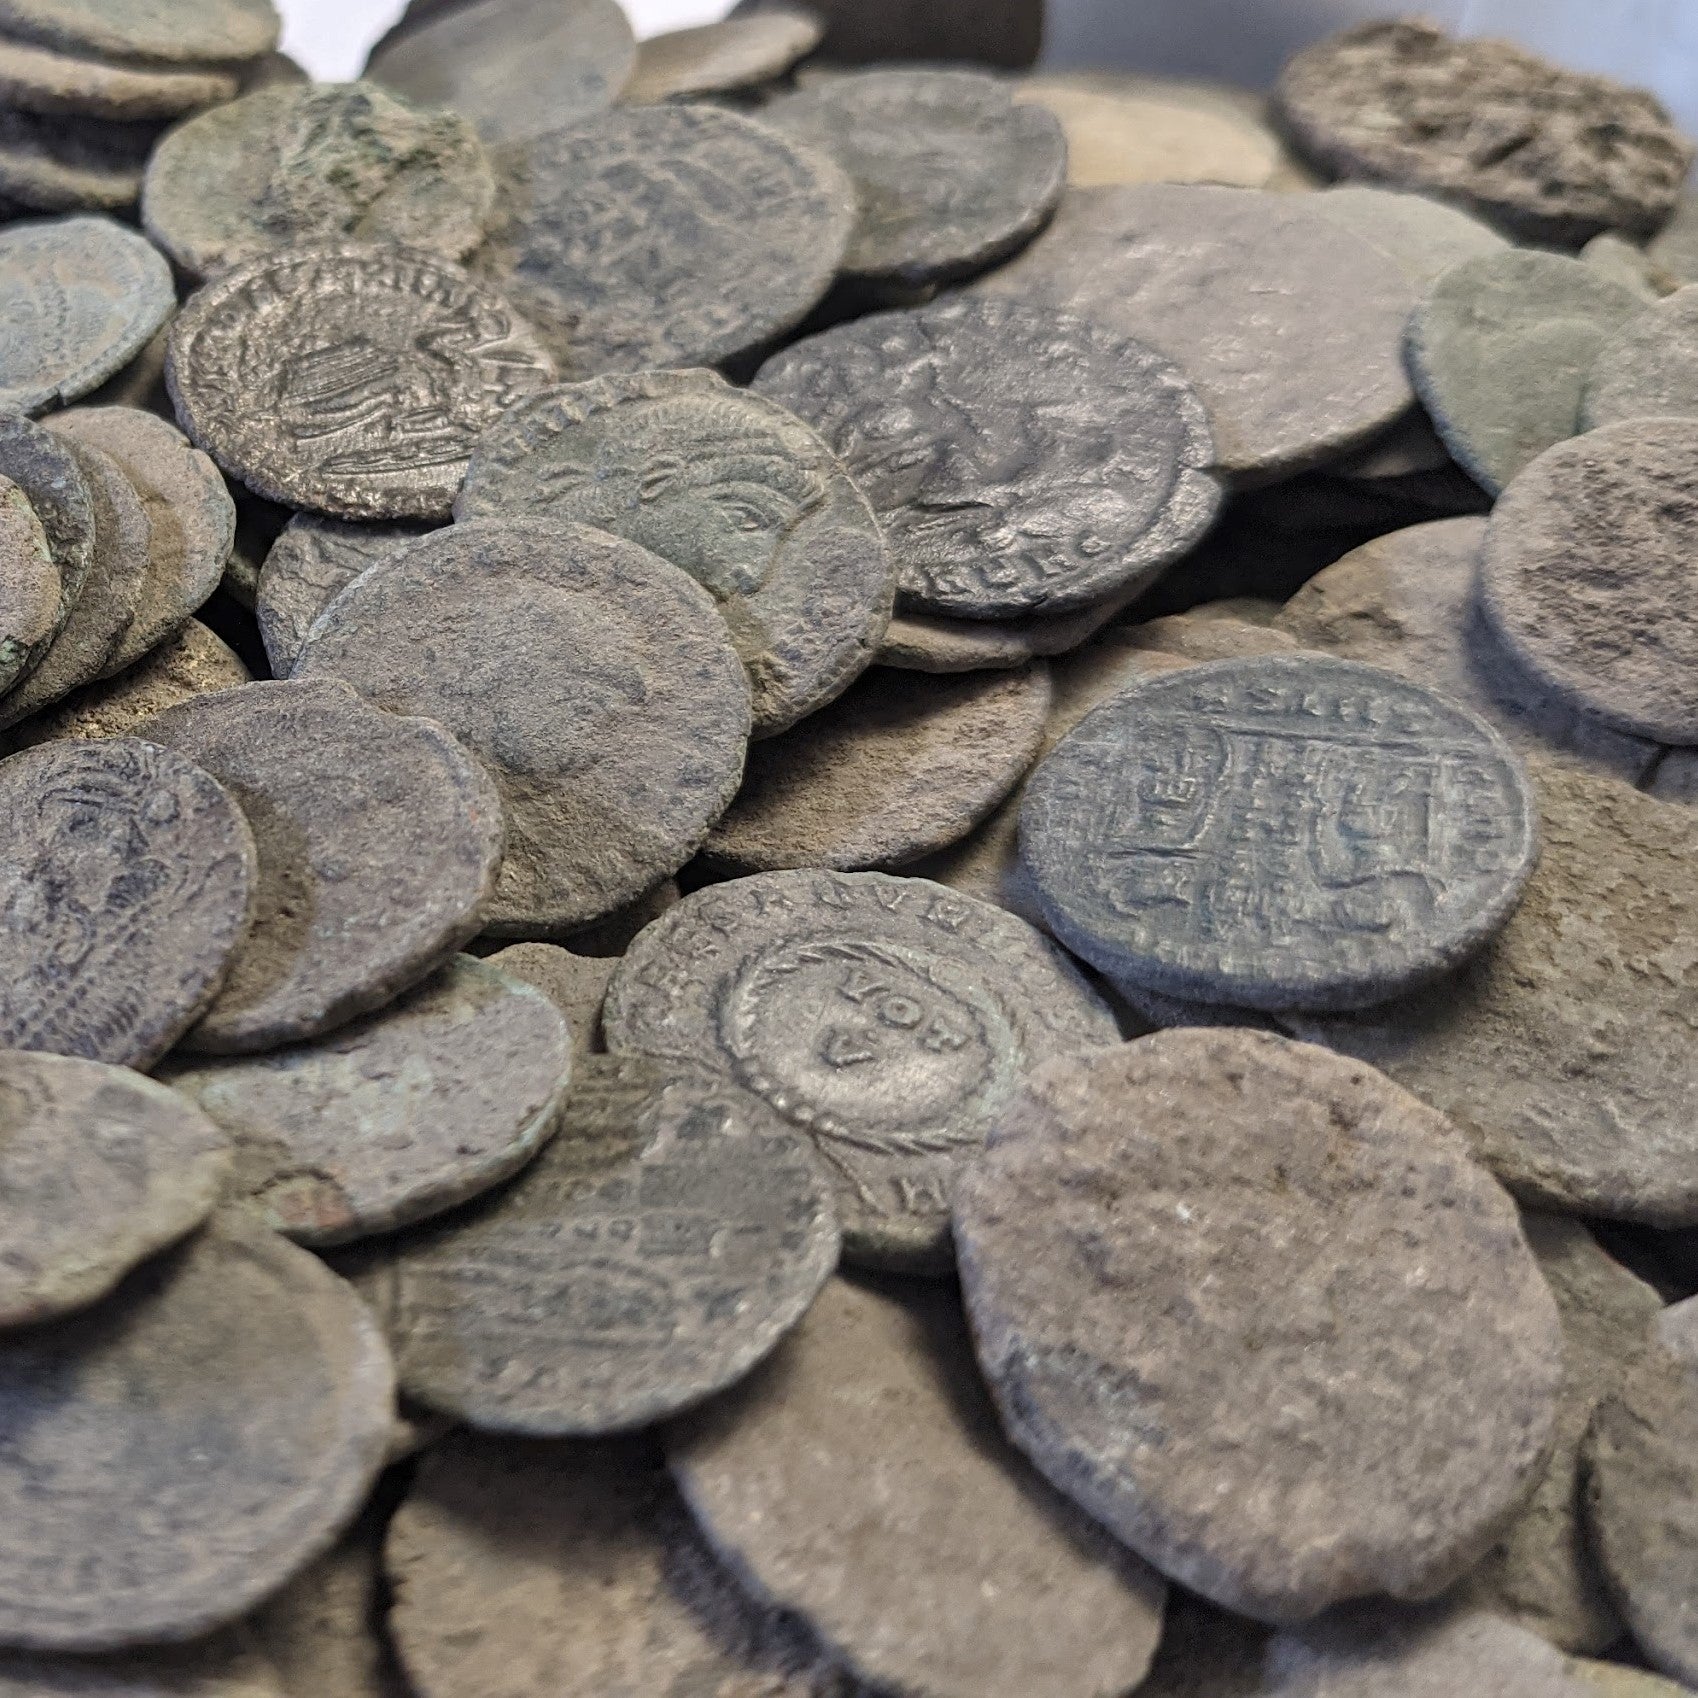 UNCLEANED Ancient Roman Bronze Coins. GENUINE! 1600+ YEARS OLD - 1 per bid - Premium Ancient Coins - uncleaned